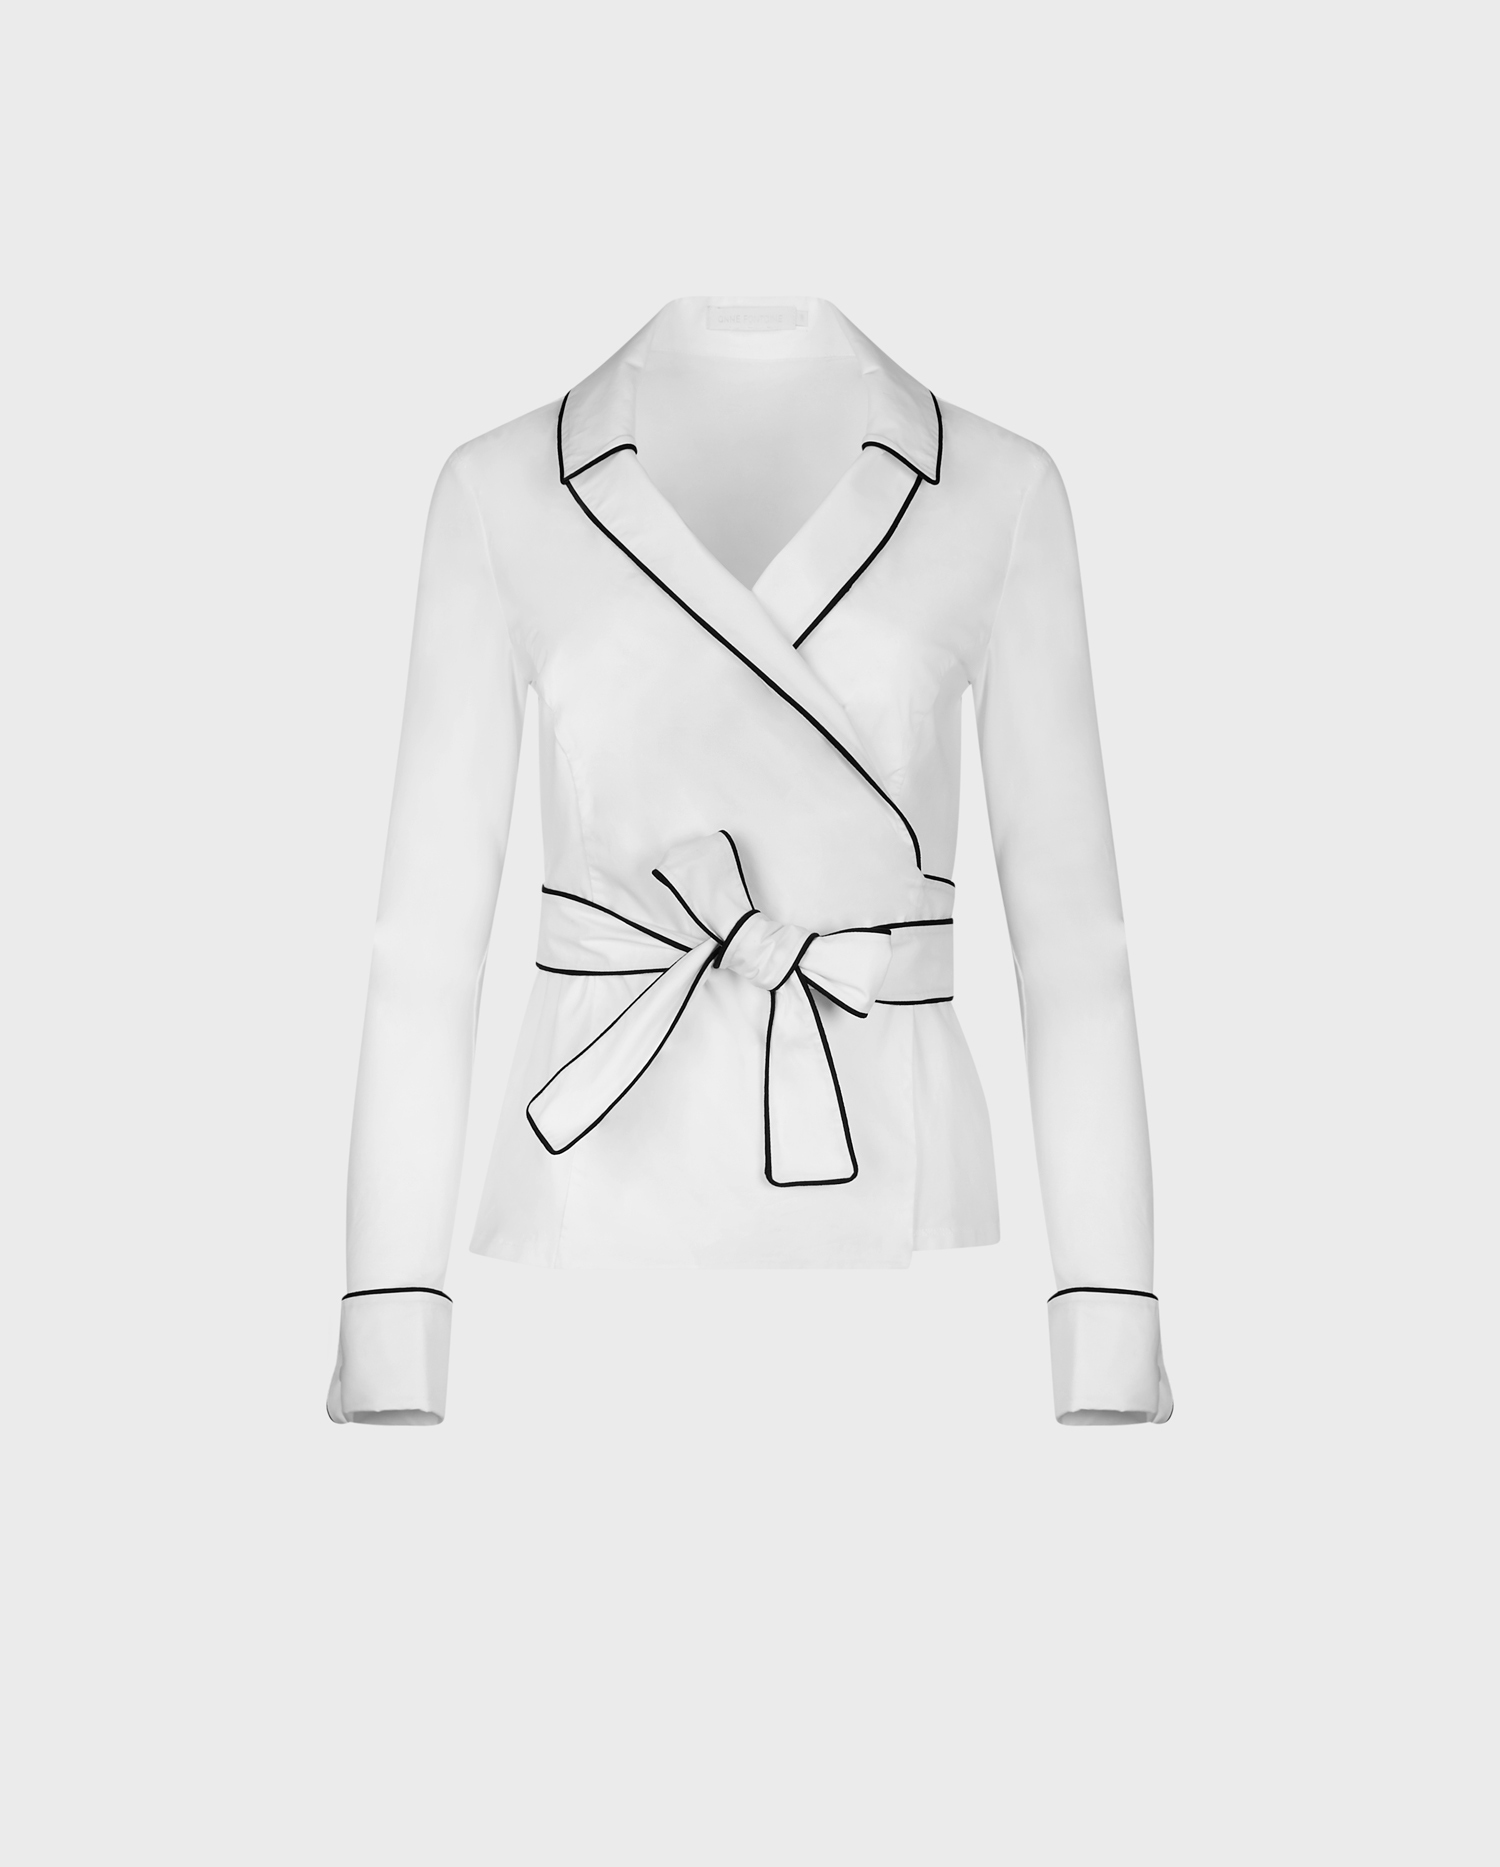 Discover The JULEN Long Sleeve White Cotton Wrap Blouse from ANNE FONTAINE